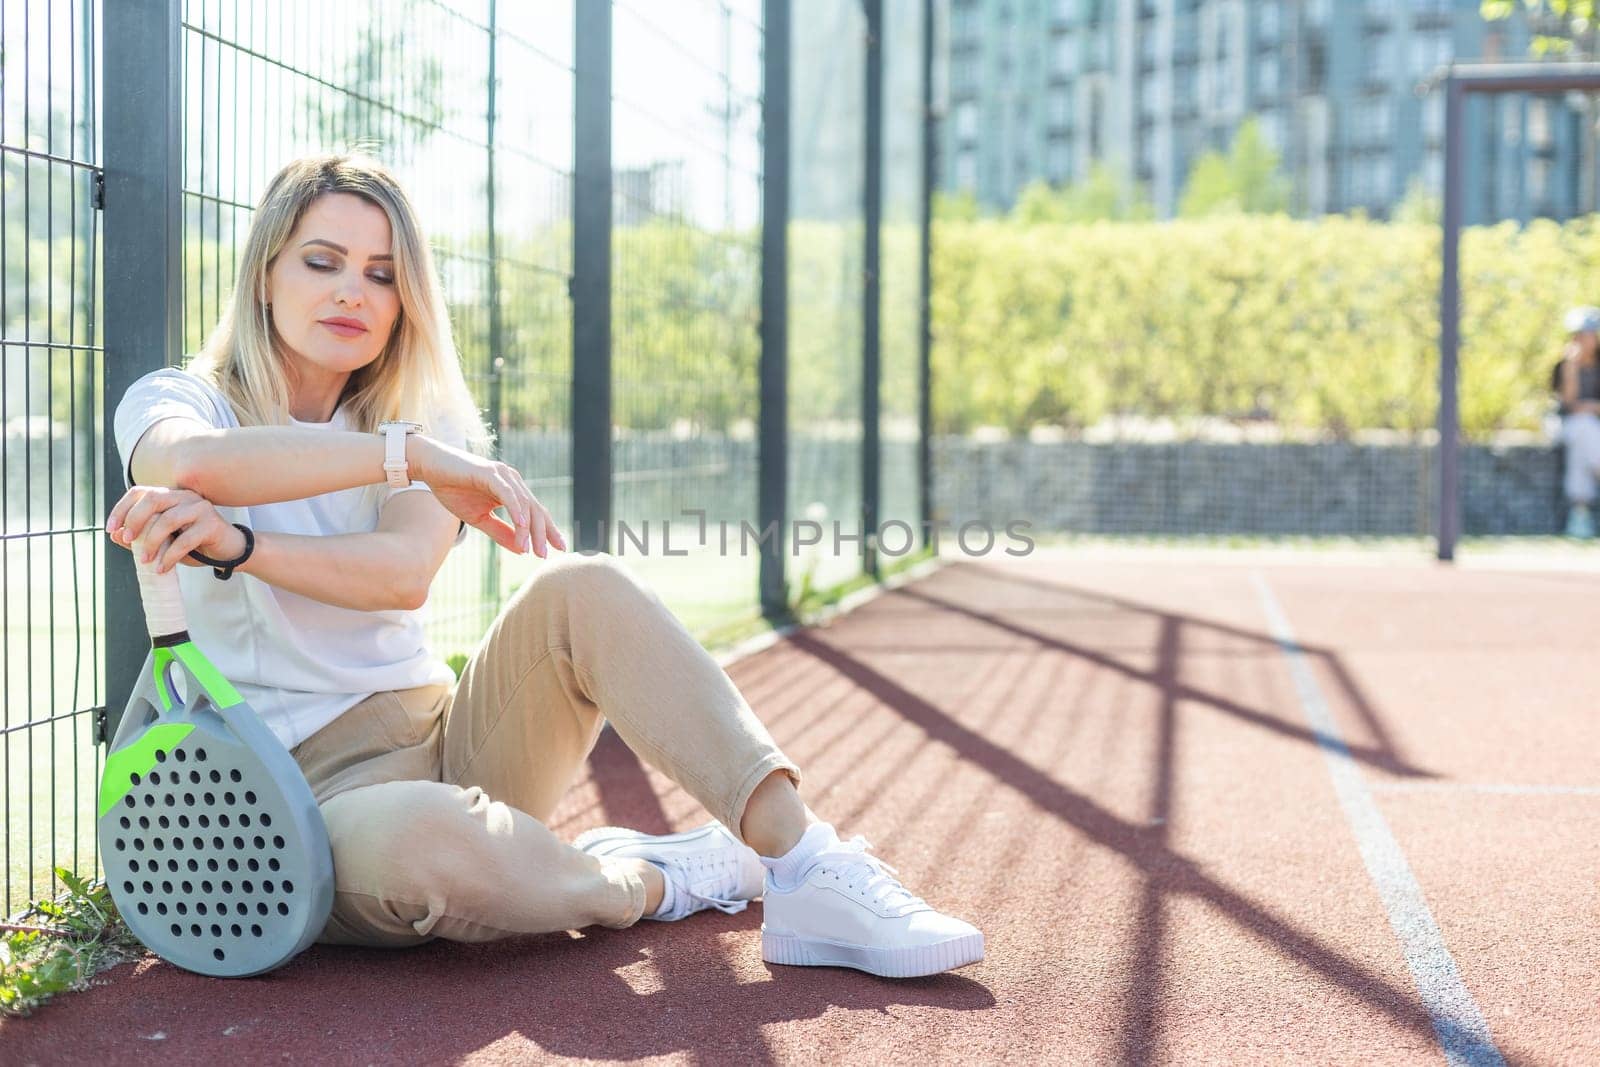 Happy female paddle tennis player during practice on outdoor court looking at camera. Copy space. High quality photo